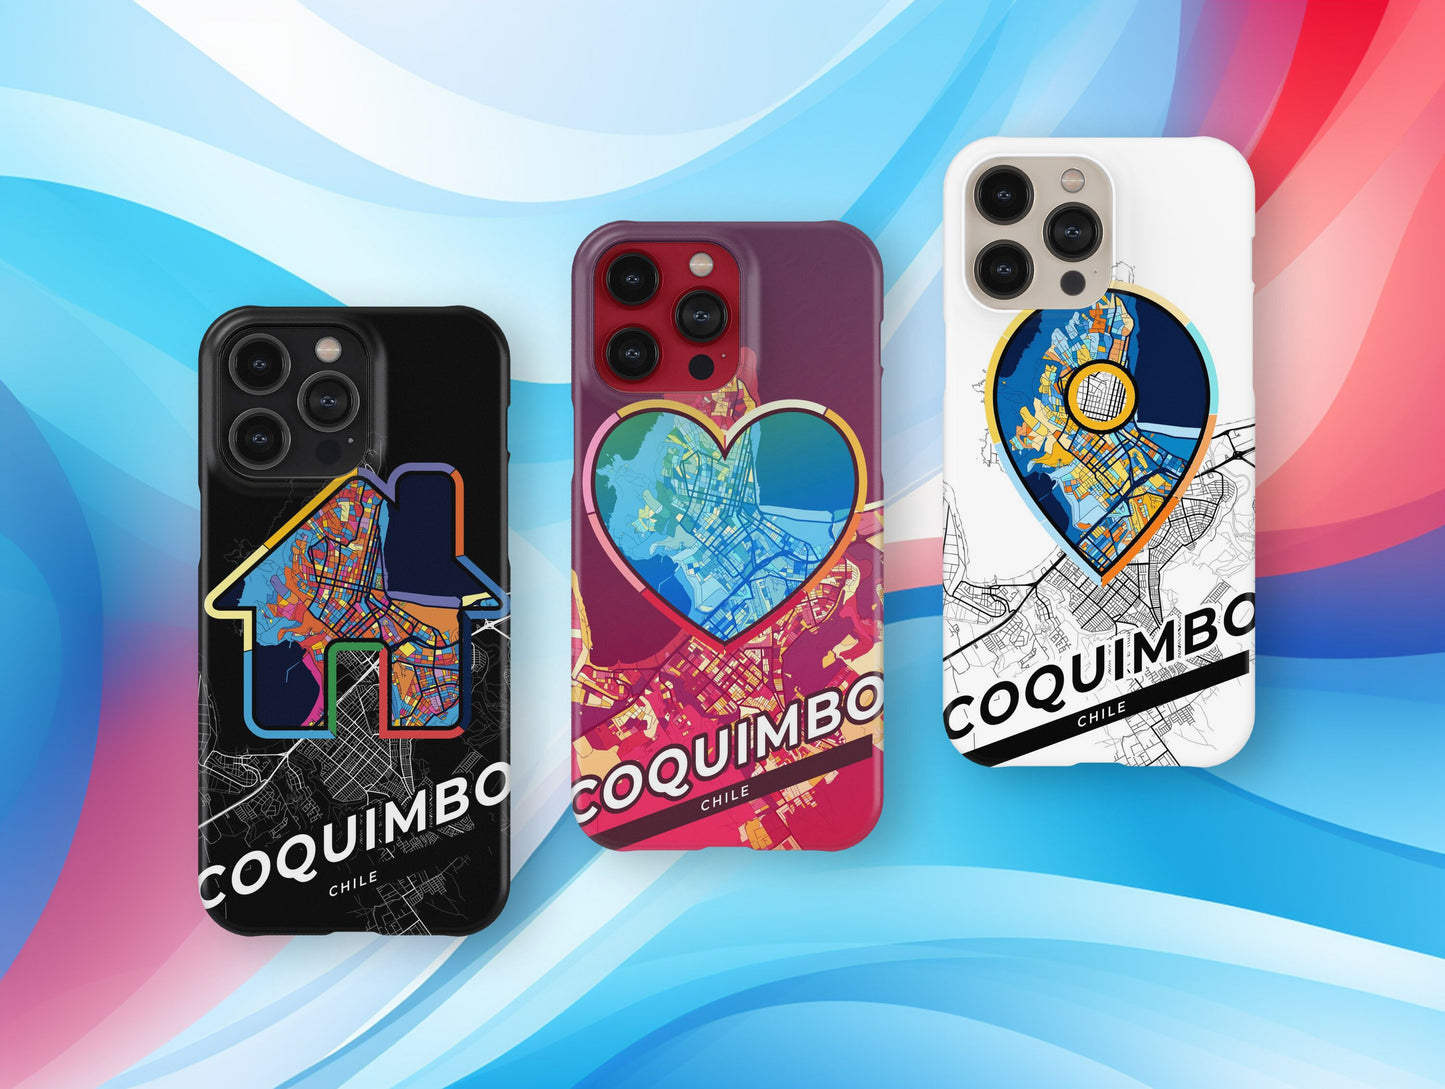 Coquimbo Chile slim phone case with colorful icon. Birthday, wedding or housewarming gift. Couple match cases.